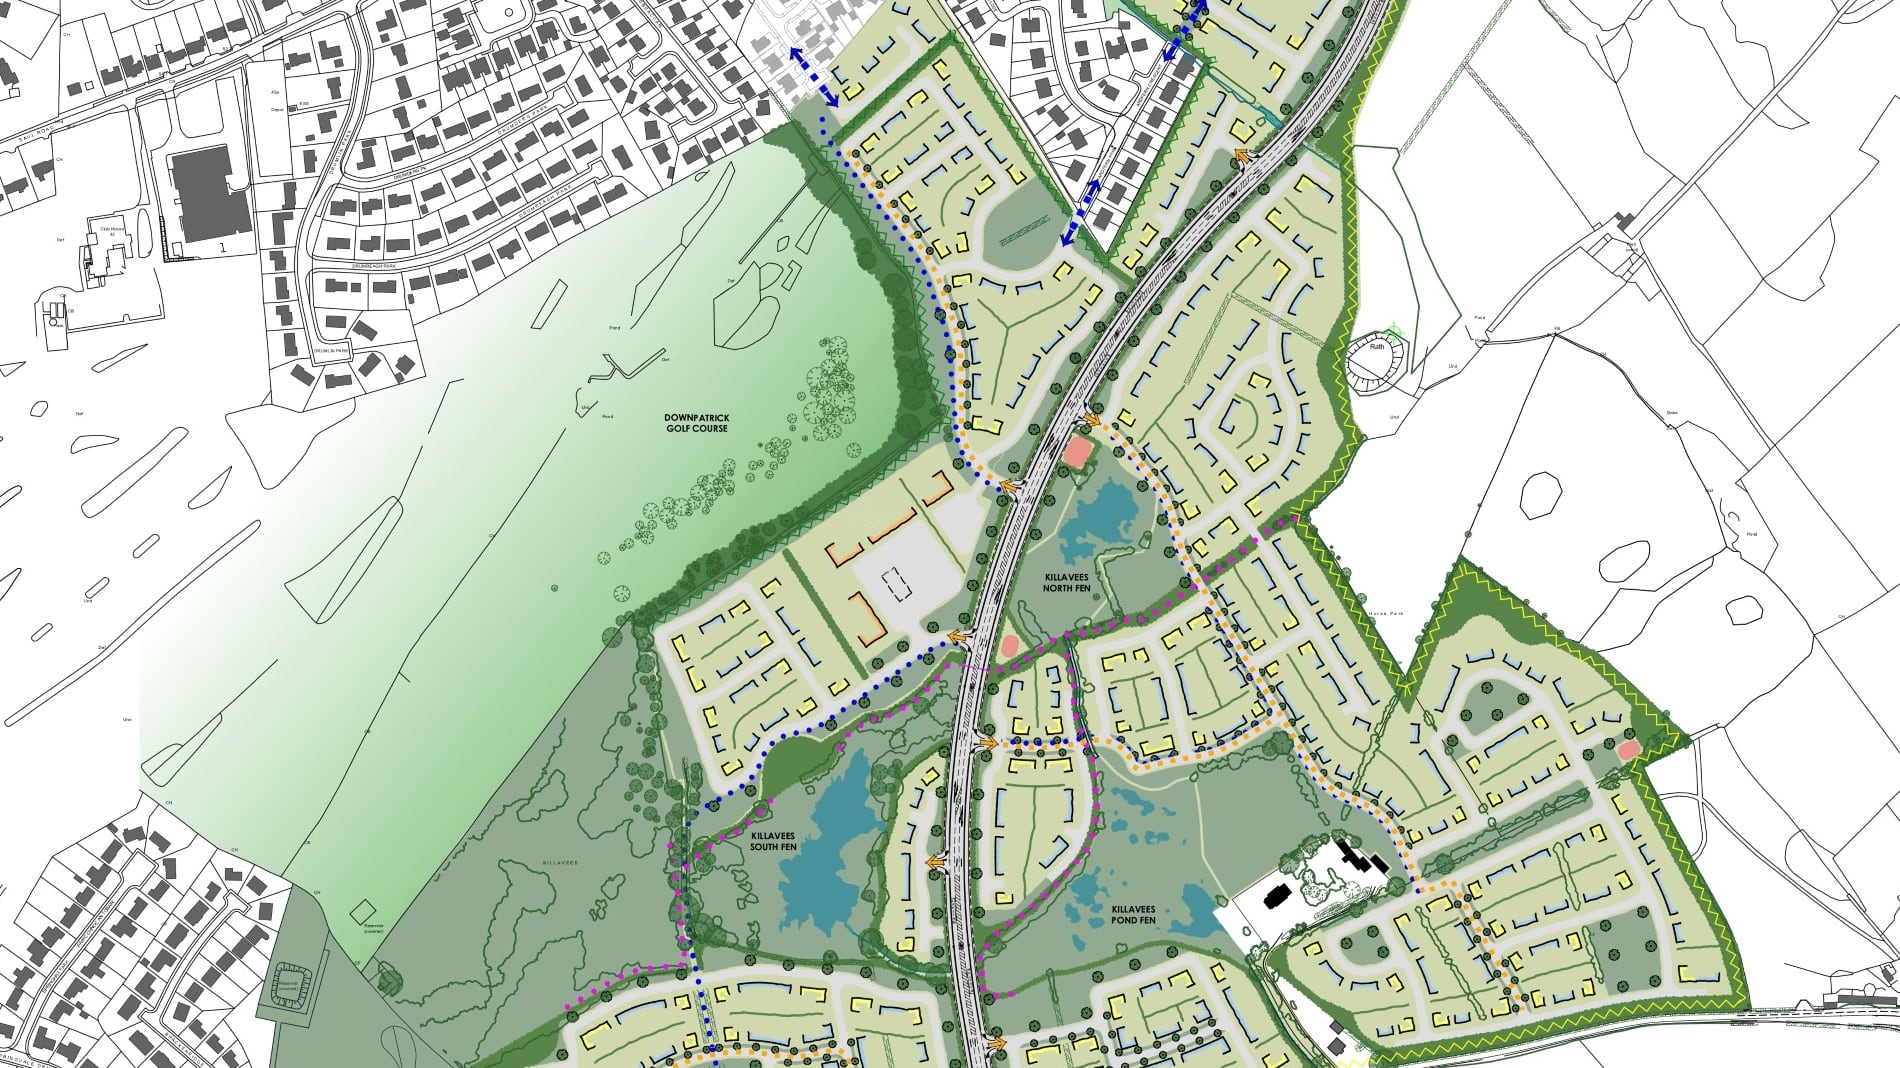 Downpatrick-based CosyGroup is planning a major development in the town that to deliver around 1,100 new homes, neighbourhood facilities, a school site and a new distributor road linking the site from the Saul Road to the Ballyhornan Road